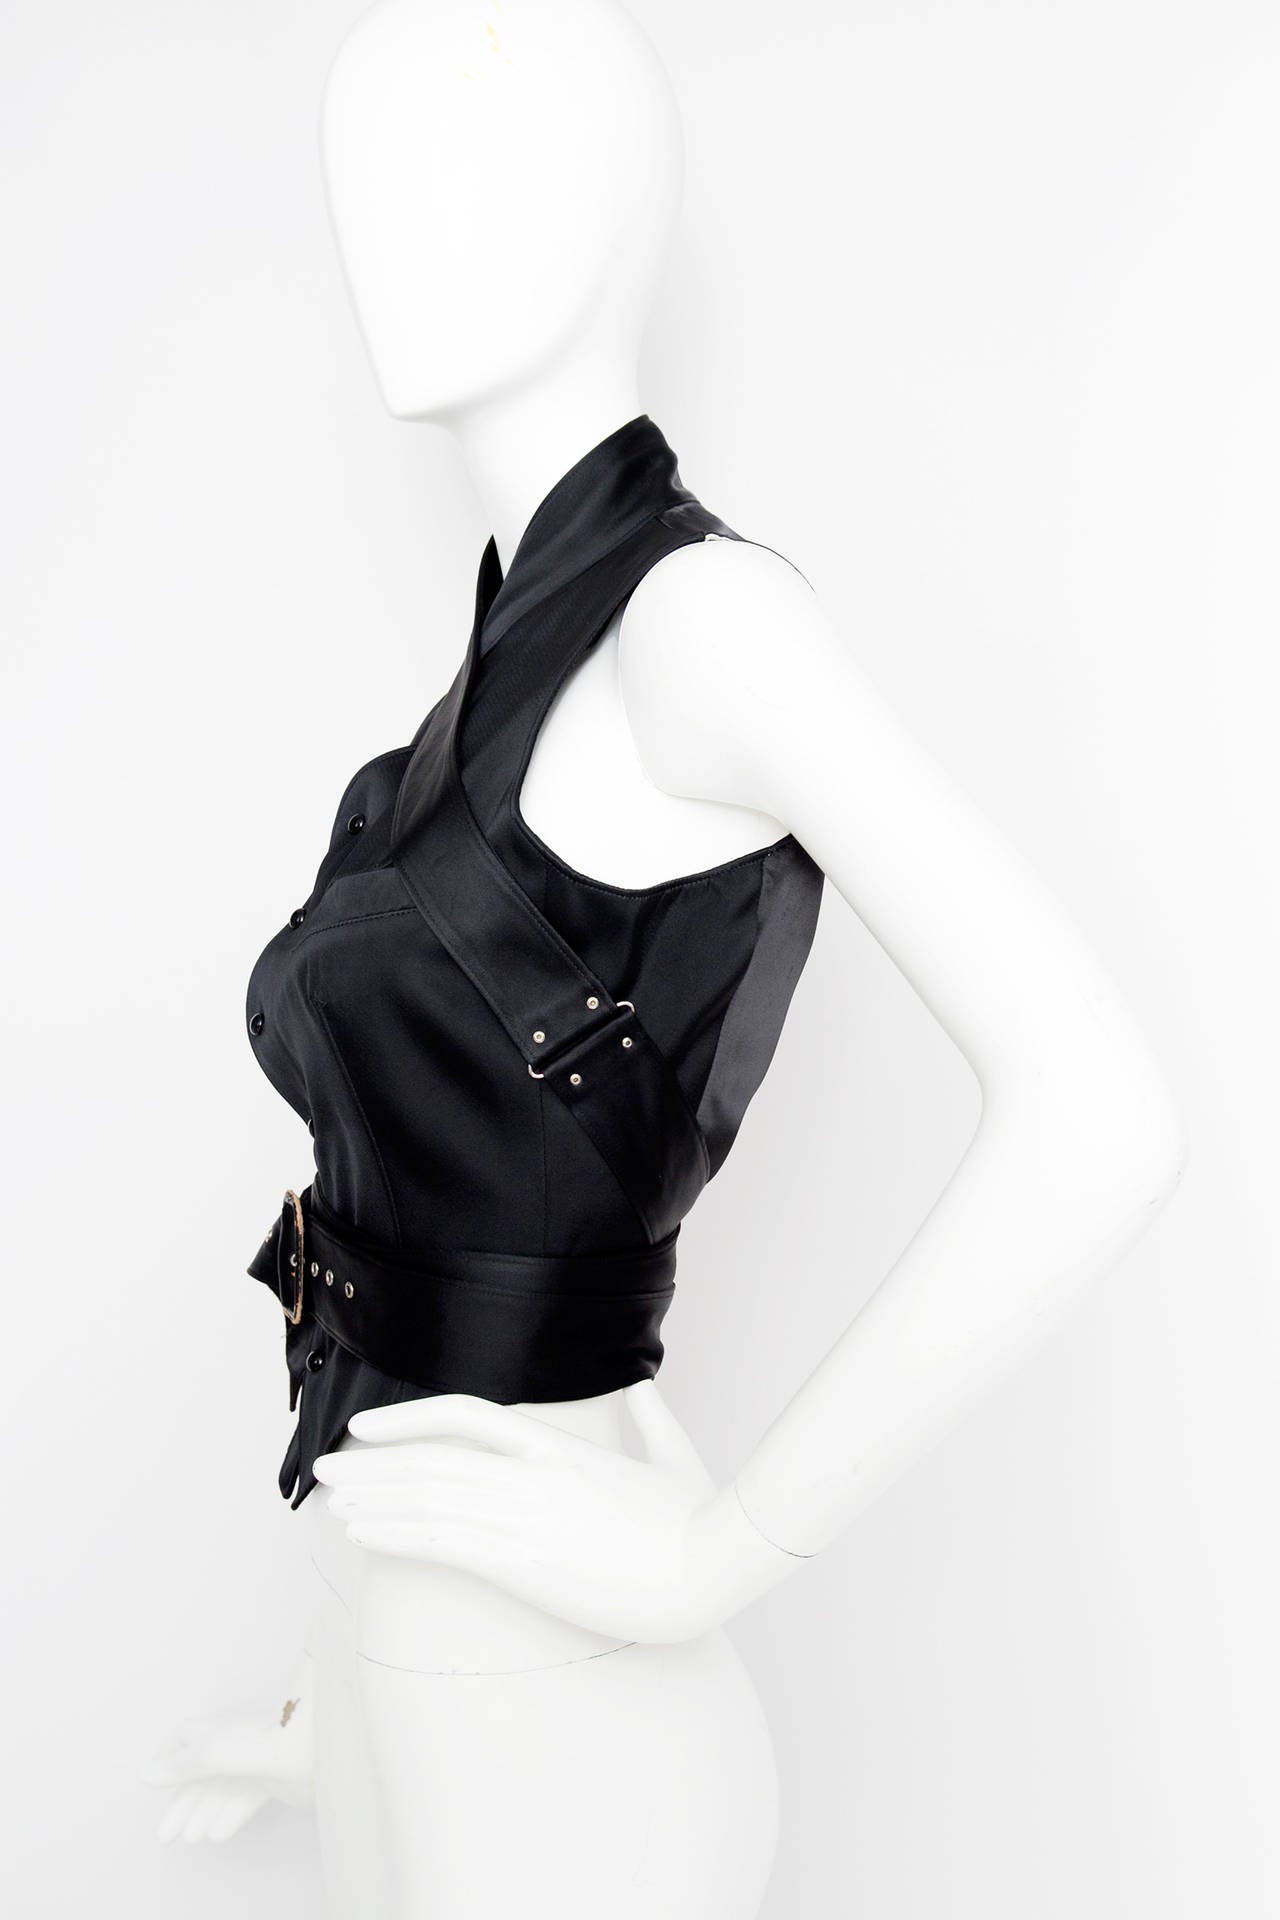 A 1990s Jean Paul Gaultier  waistcoat with two welt pockets on the bust and a front button closure. The waist coat has a double waist belt that is attacked to the neckline and ties in the front with a buckle closure. The waistcoat has a contrasting